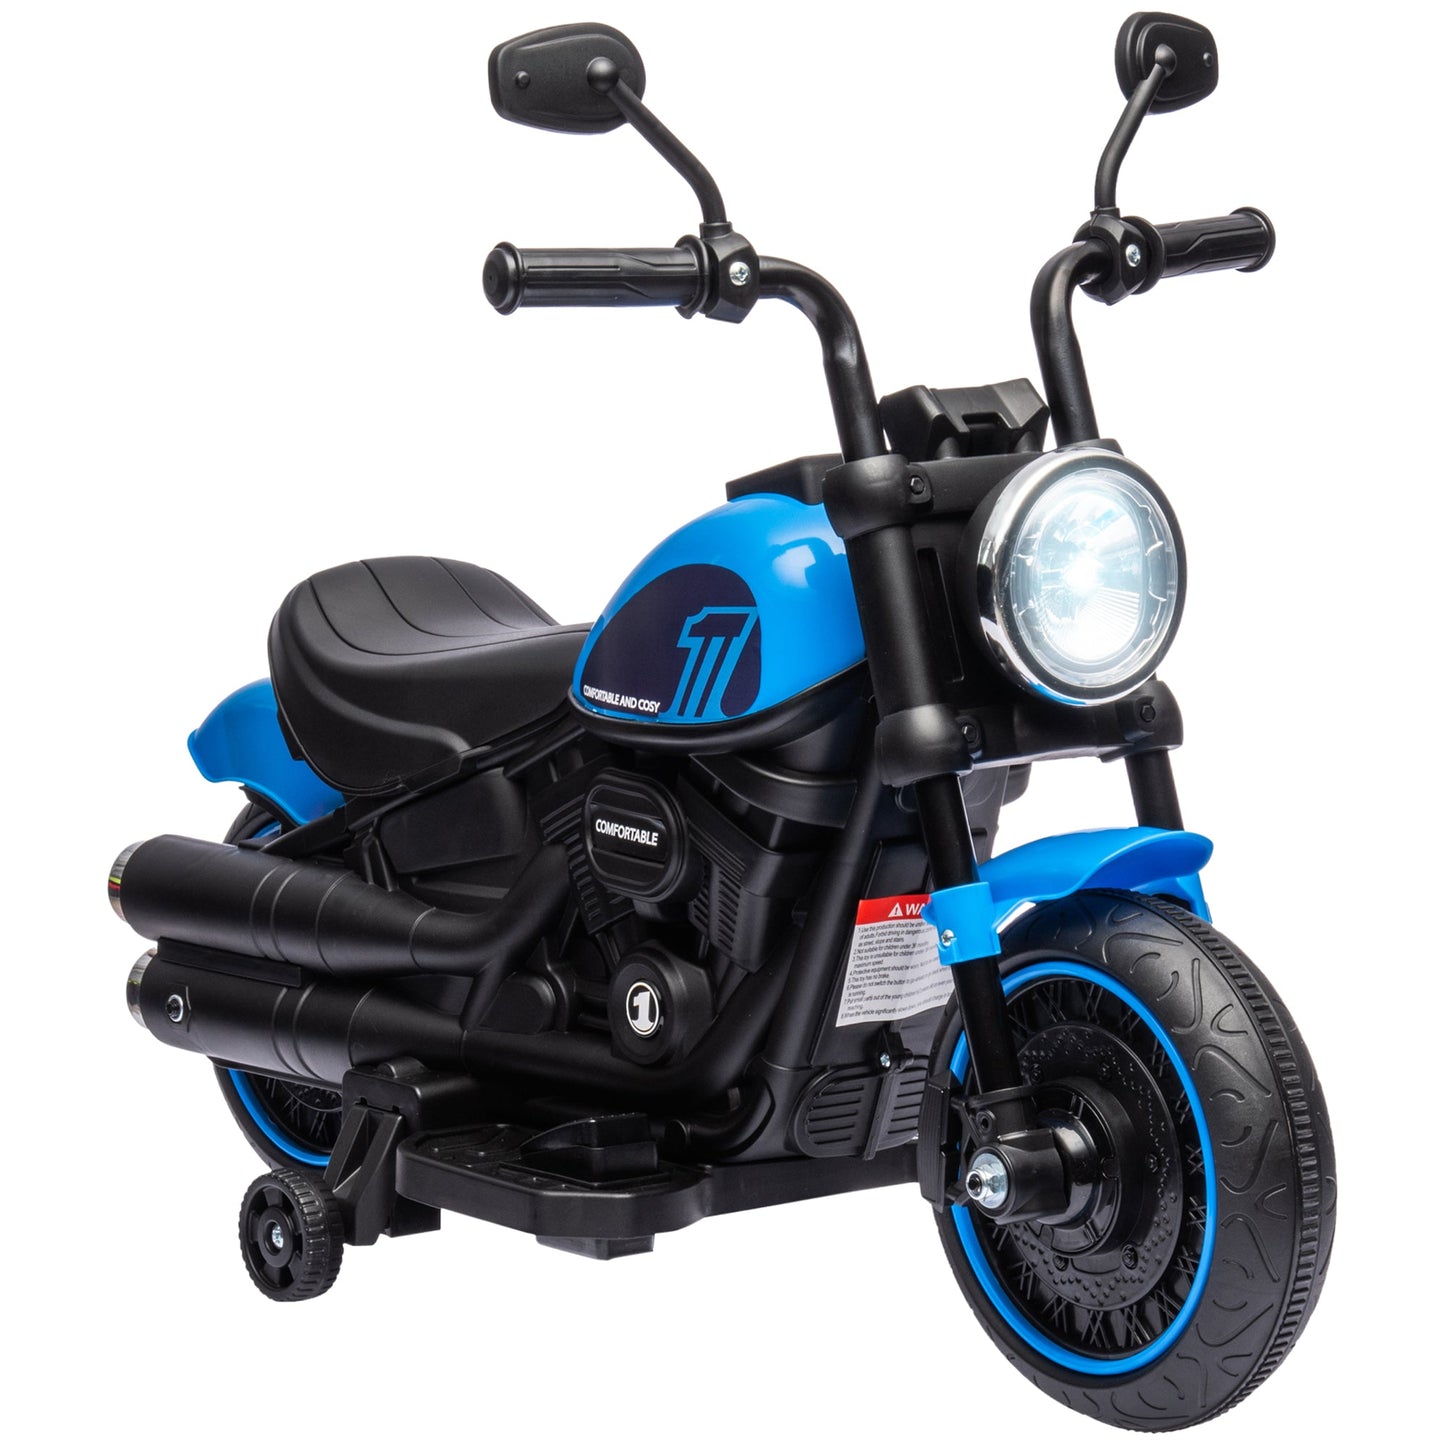 -Aosom 6V Kids Motorcycle Ride-on Toys with Training Wheels, Single-Button Start, Battery-Operated Ride-on Vehicle, Blue - Outdoor Style Company